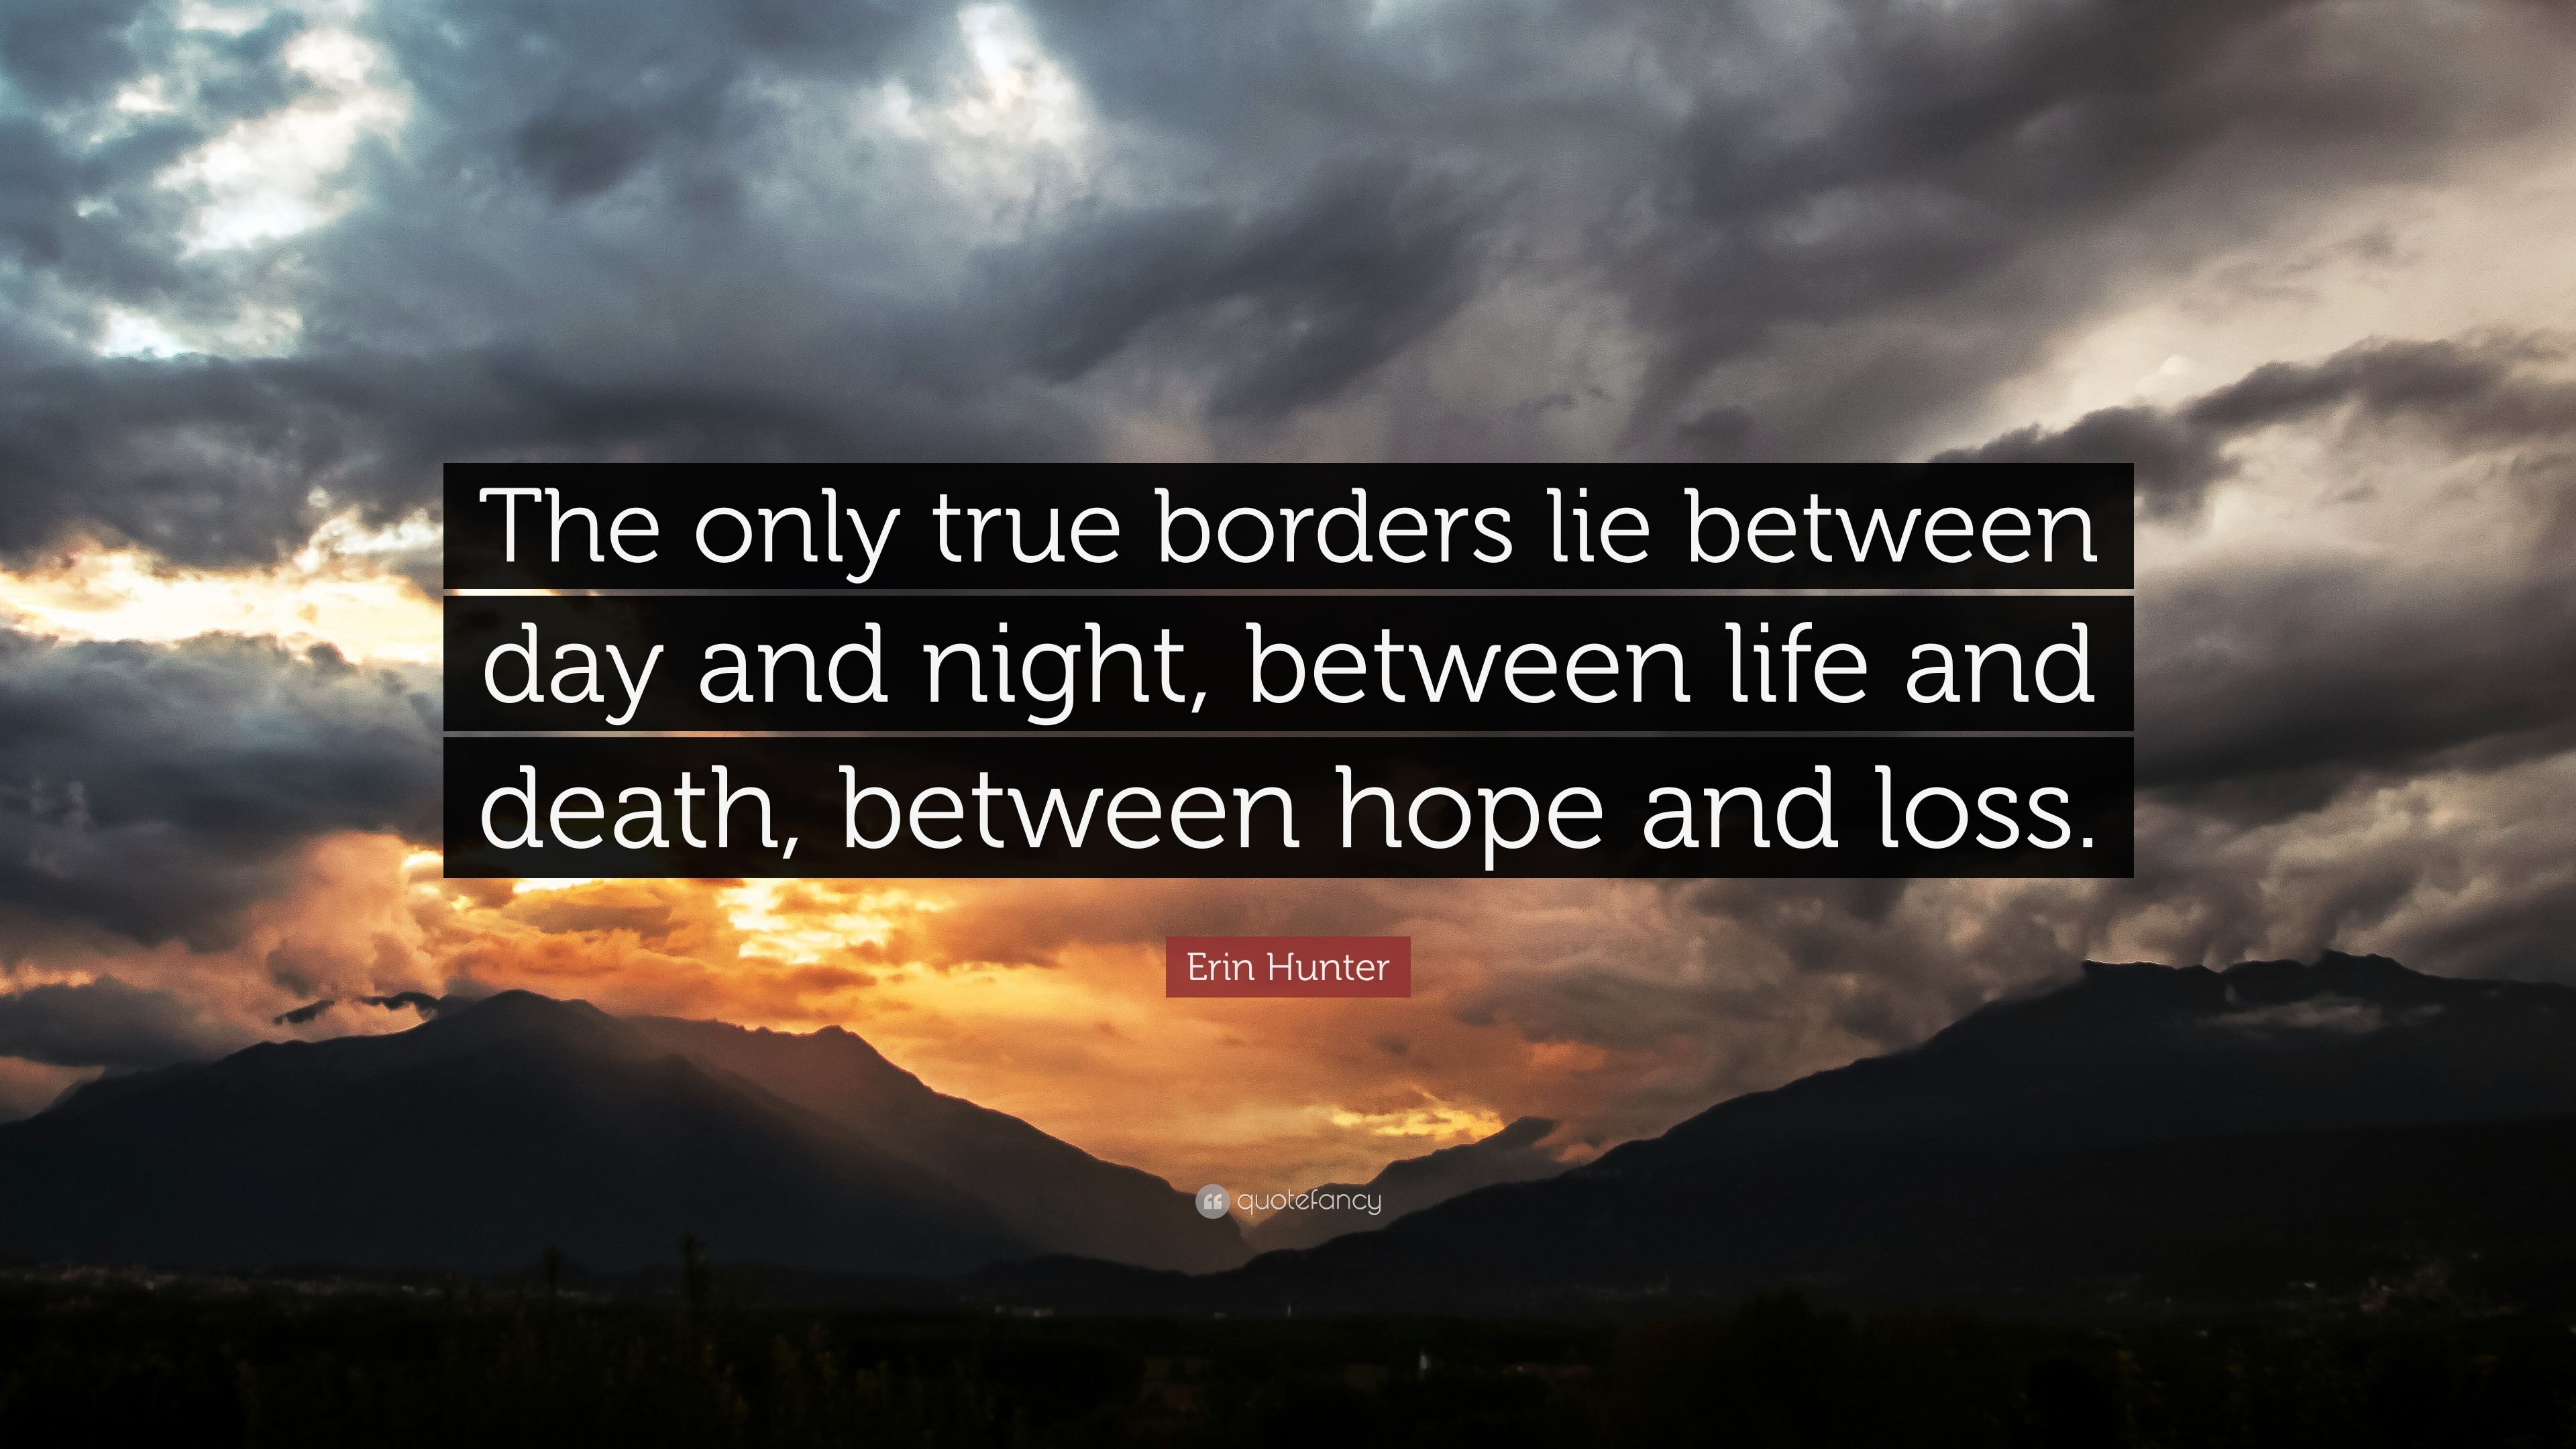 3840x2160 Erin Hunter Quote: “The only true borders lie between day and night, between